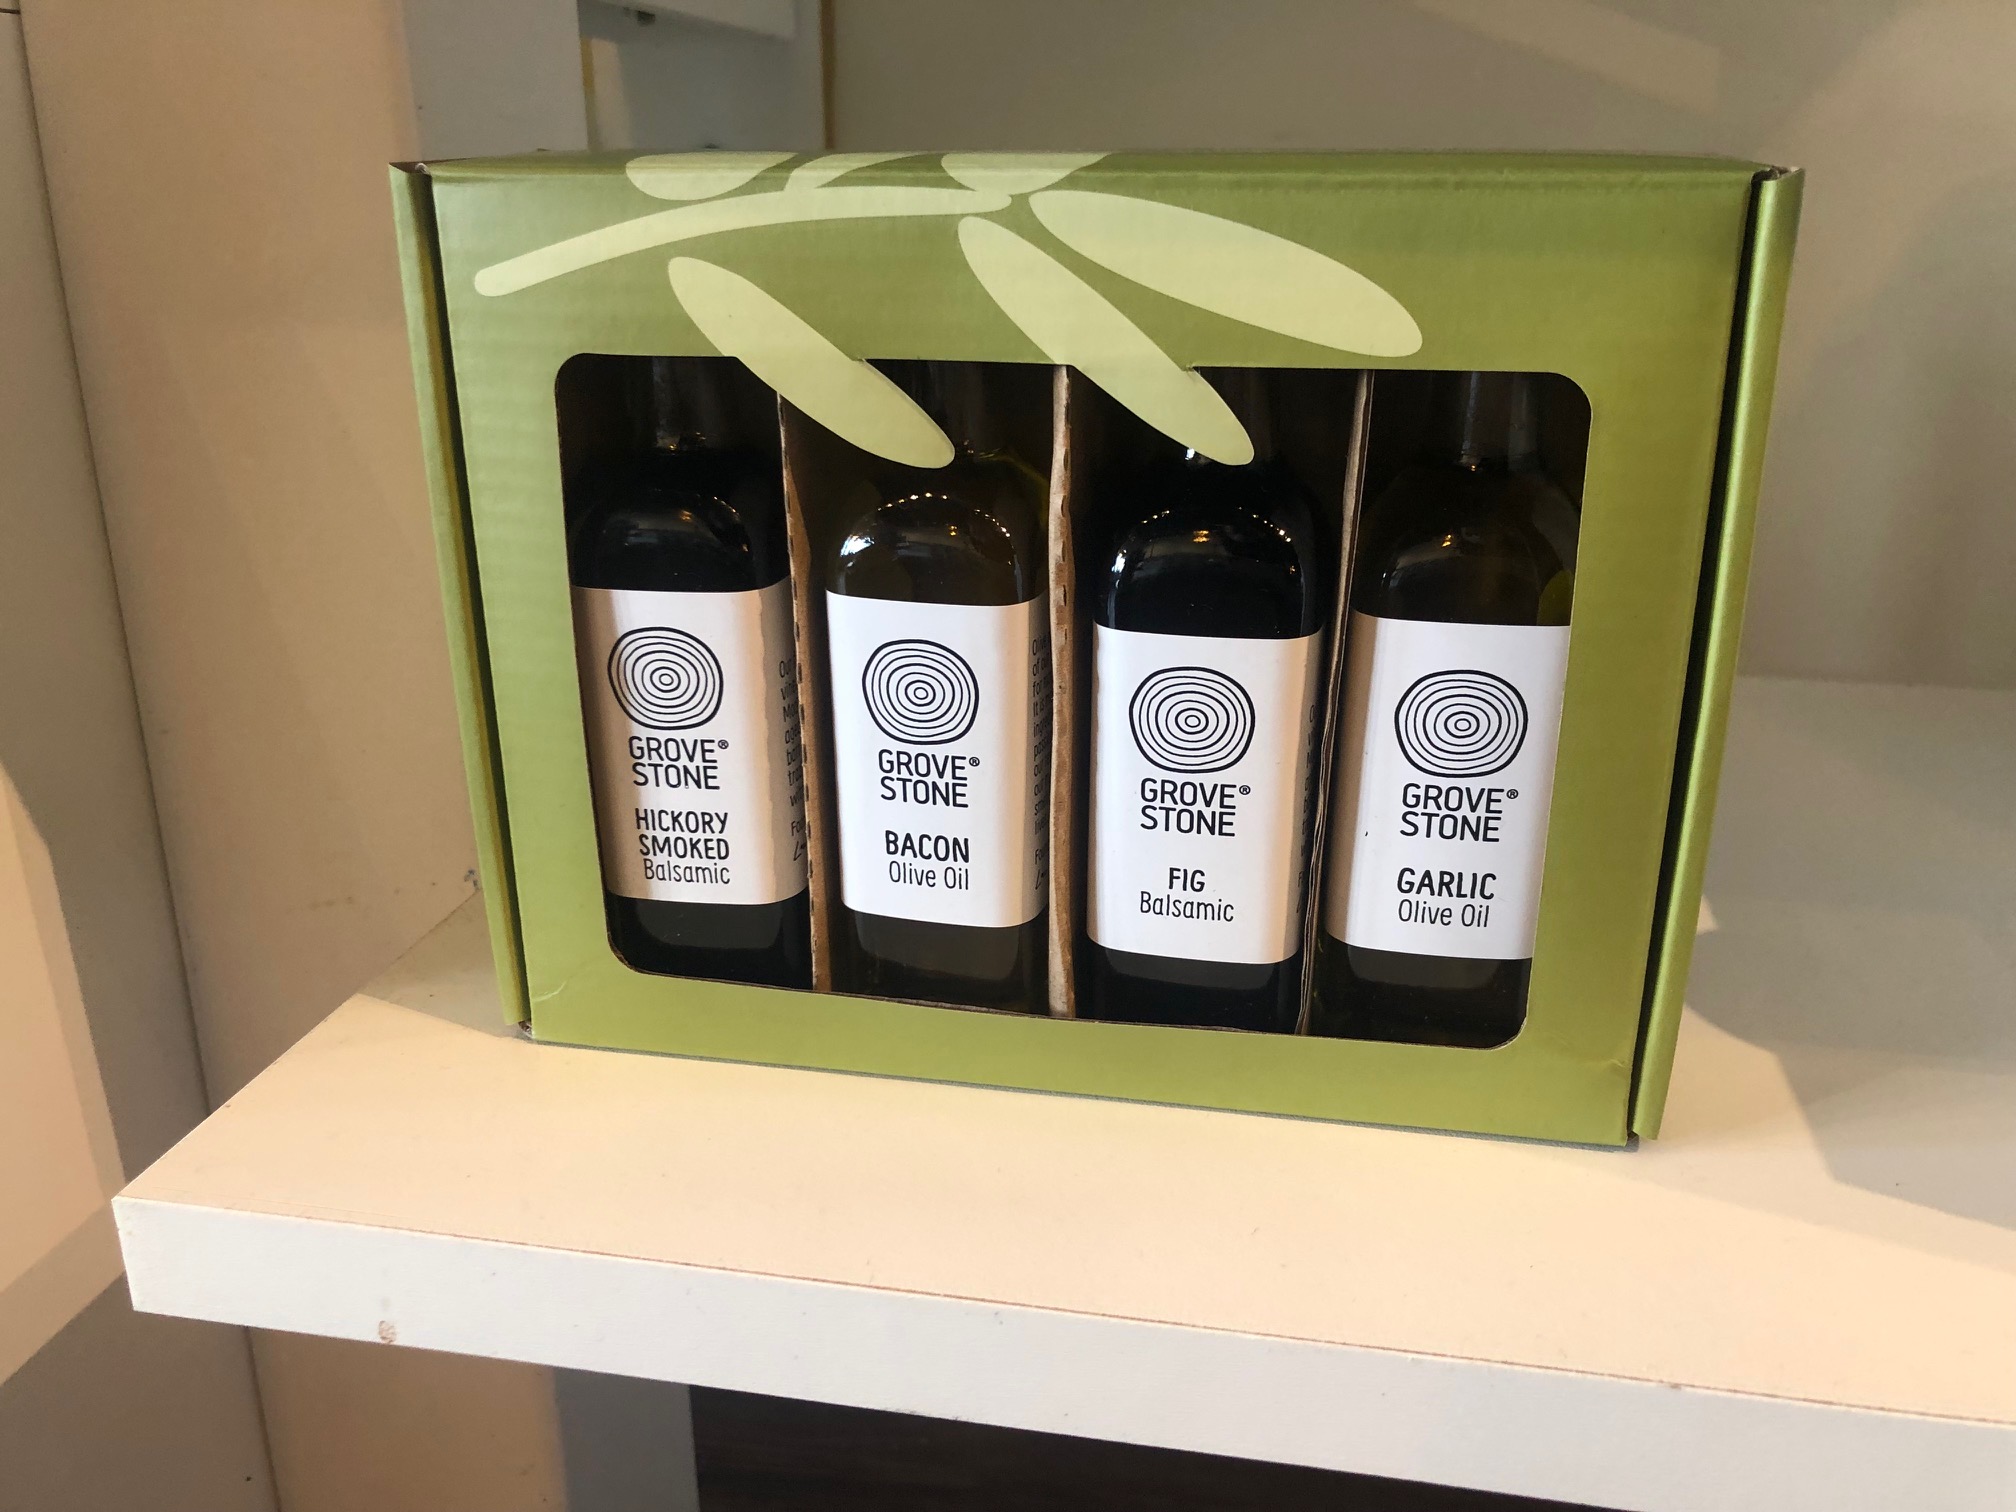 In a green cardboard box, there are four mini bottles of Grovestone olive oil. Photo by Alyssa Buckley.